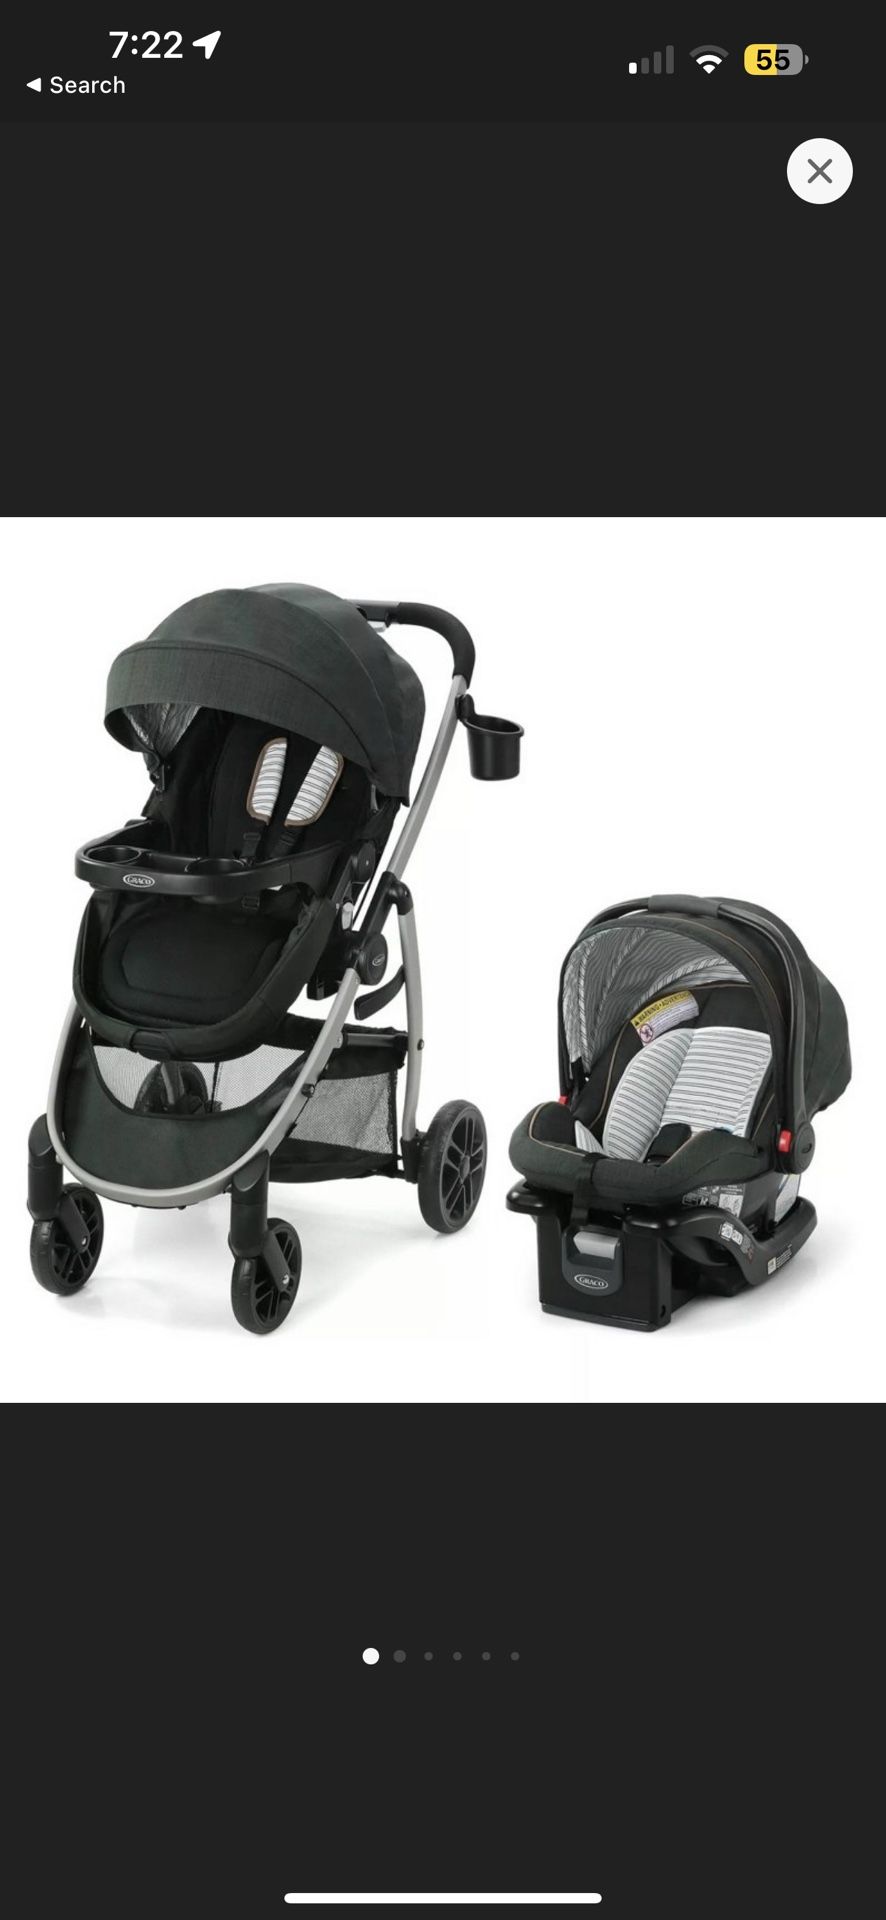 Graco Travel system NEW